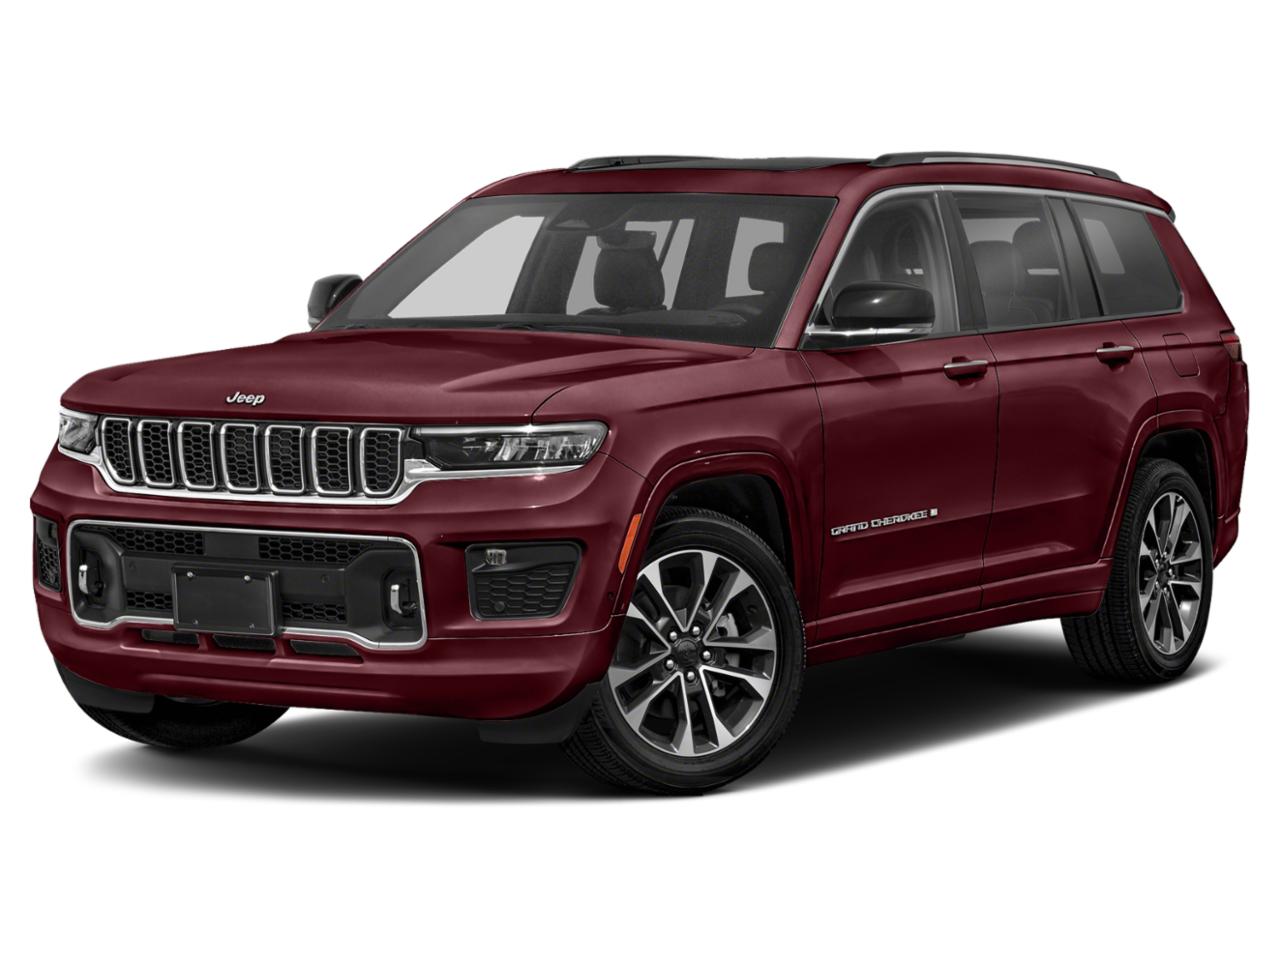 2021 Jeep Grand Cherokee L Vehicle Photo in Forest Park, IL 60130